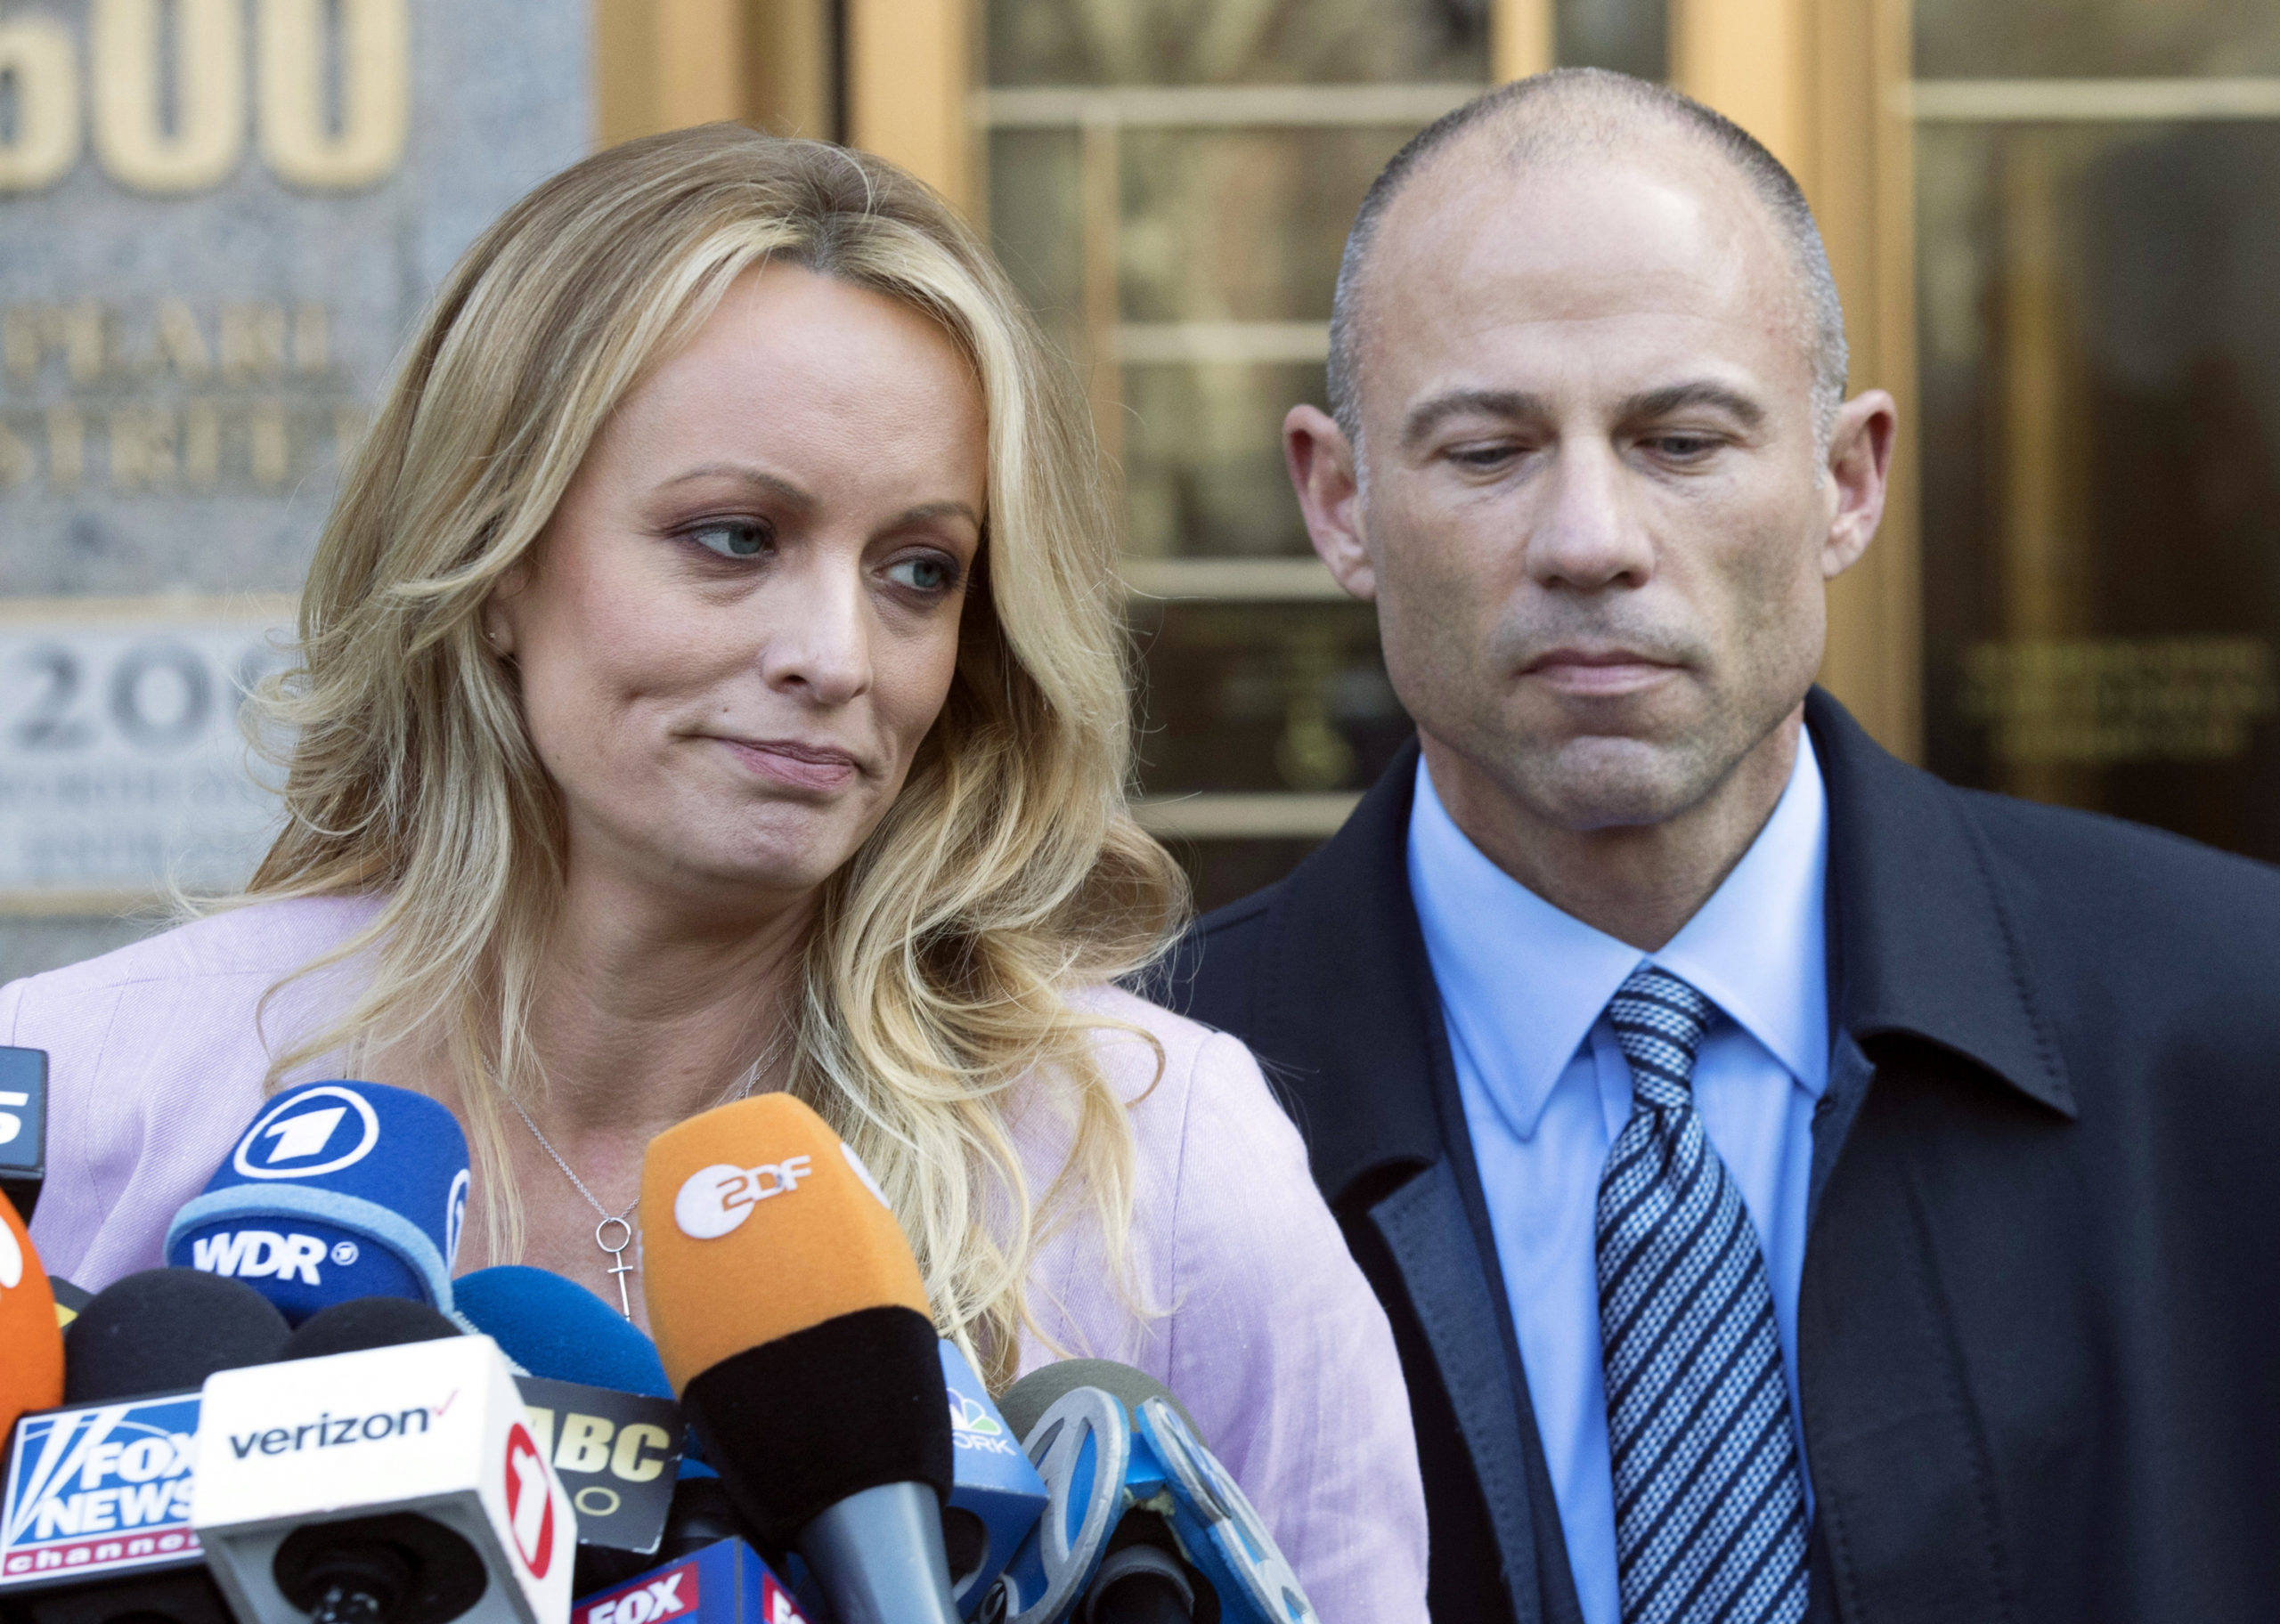 Porn actress Stormy Daniels, accompanied by her attorney, Michael Avenatti, talks to the media as she leaves federal court in New York on April 16, 2018. On Friday, Avenatti was convicted of charges he cheated Daniels out of nearly $300,000.